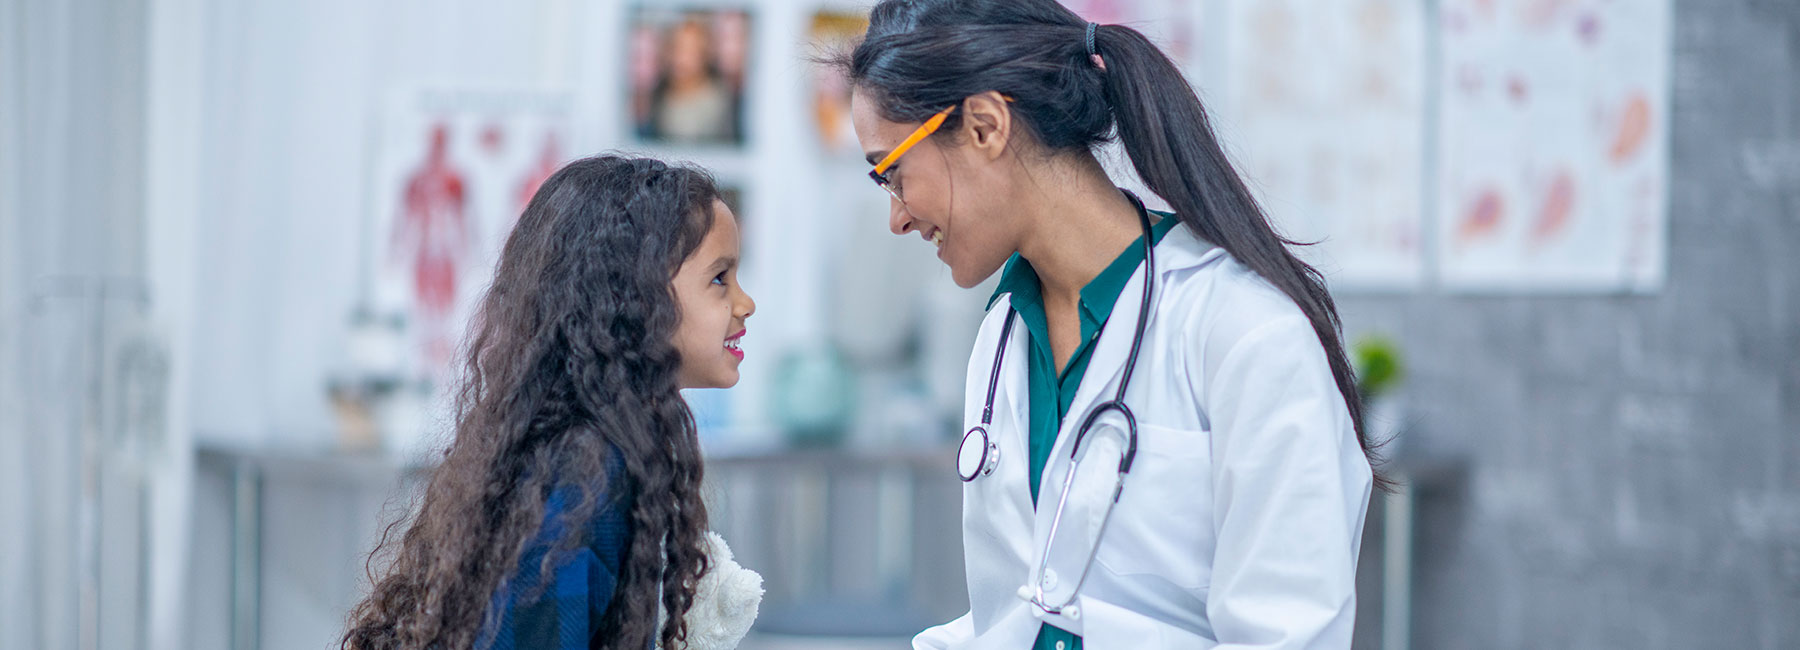 A doctor chats with a young girl